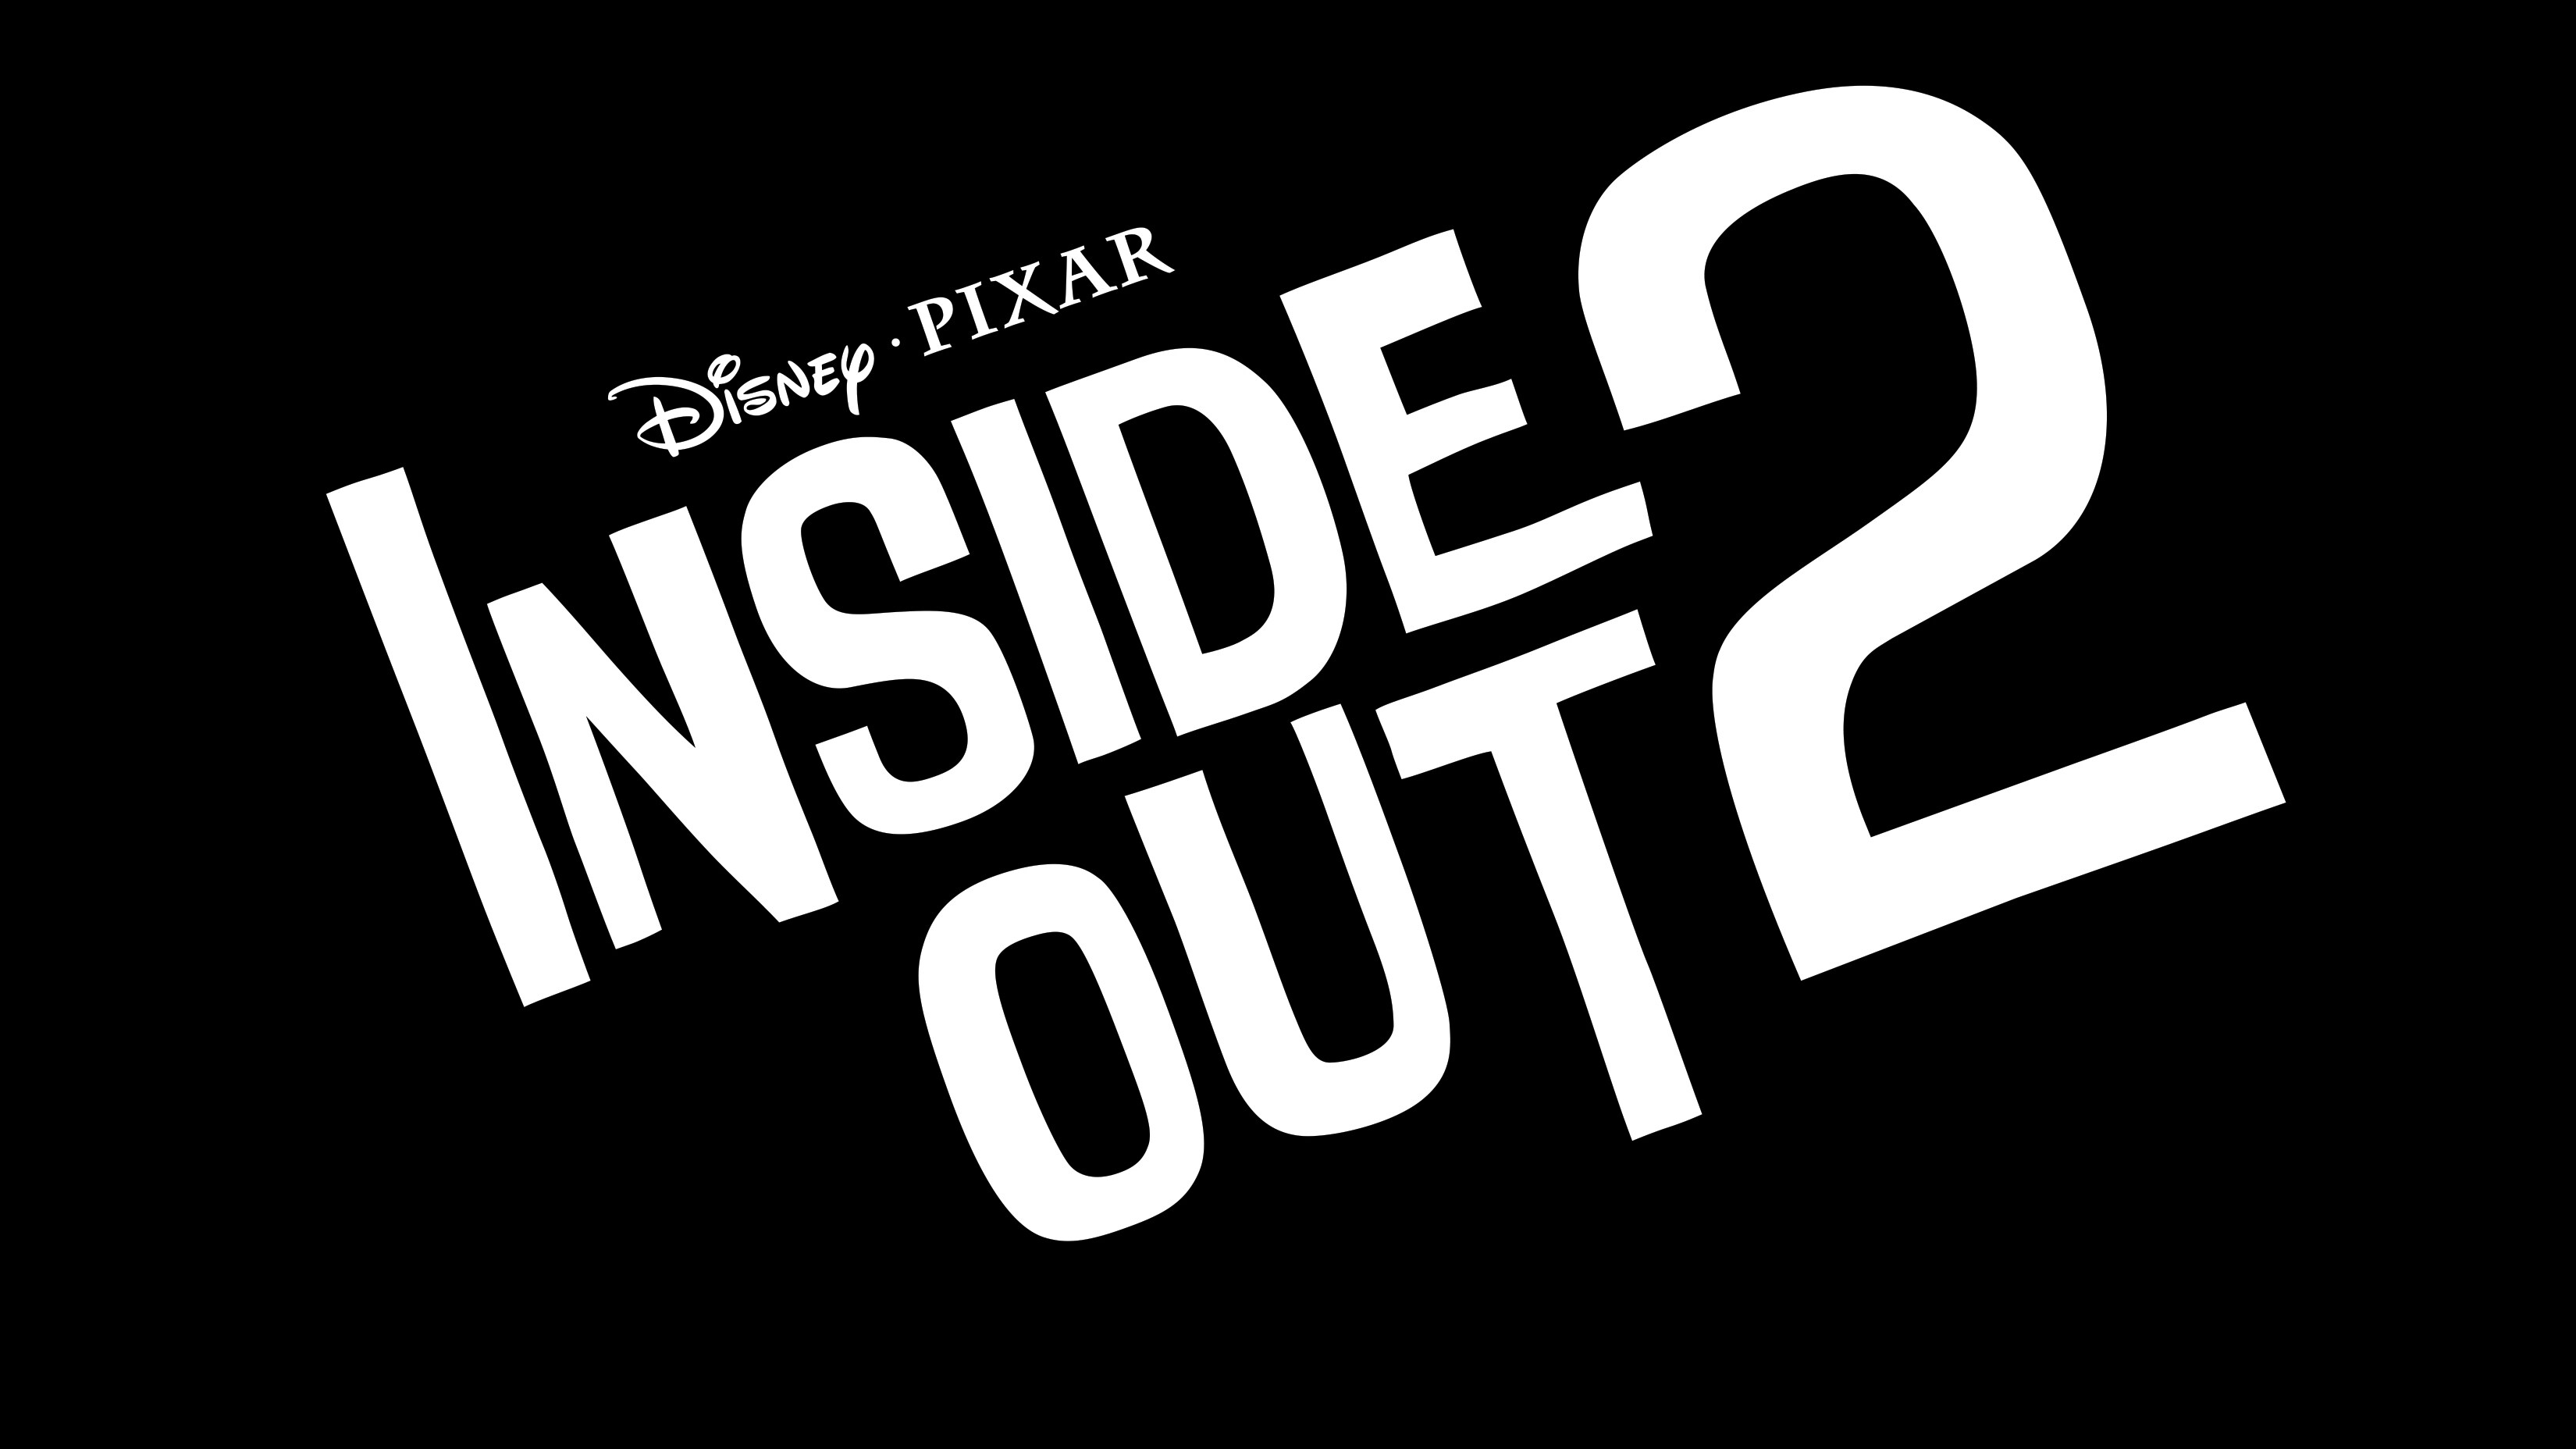 INSIDE OUT 2 INTRODUCES A NEW EMOTION – TRAILER, POSTER, FILM STILLS NOW AVAILABLE